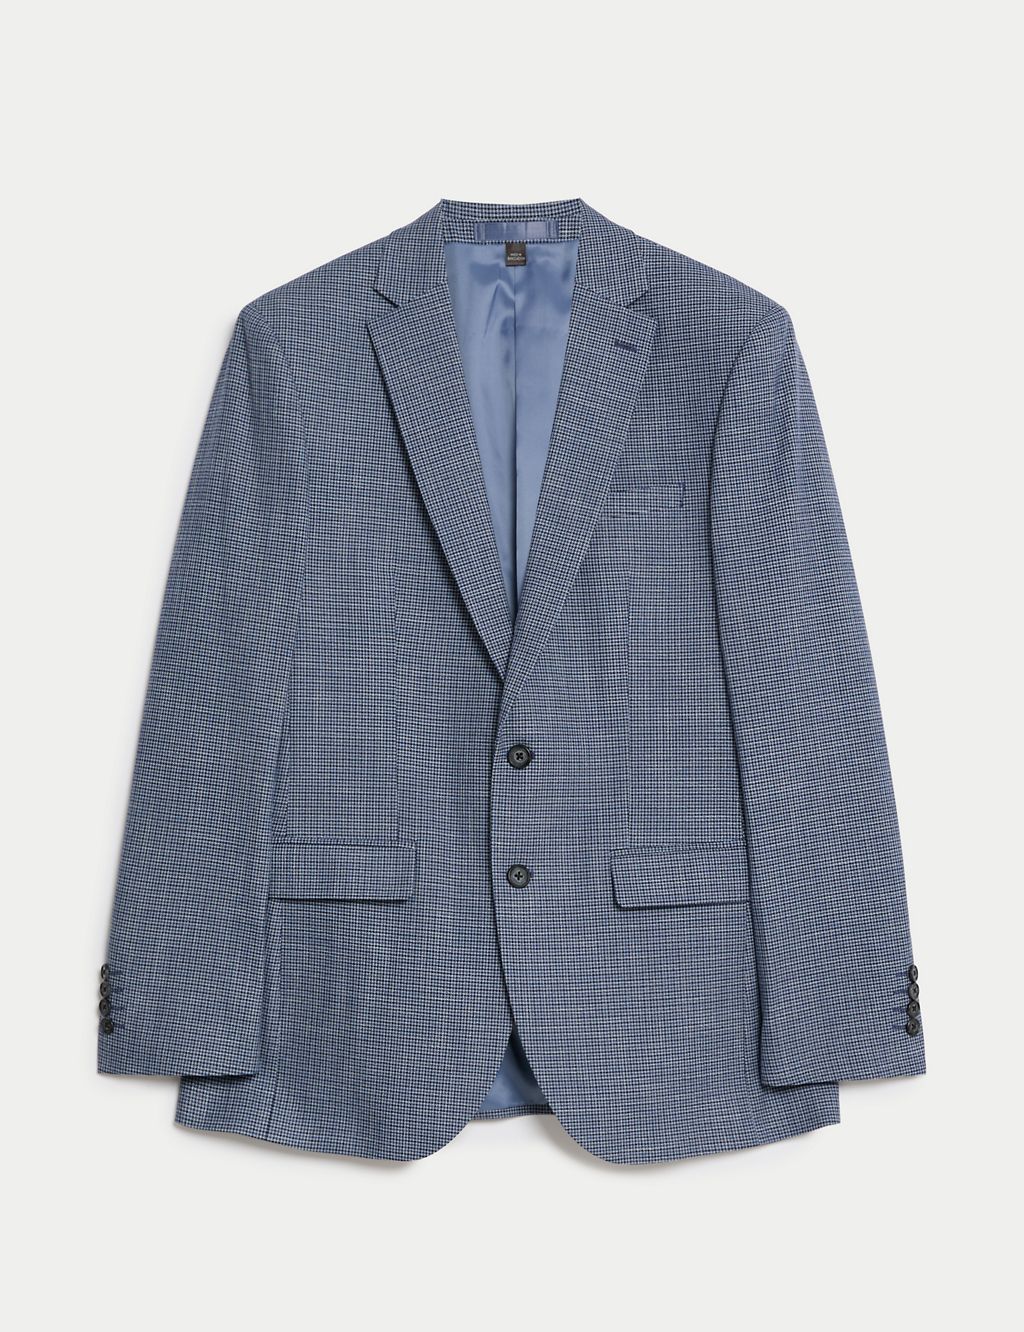 Slim Fit Puppytooth Stretch Suit Jacket 1 of 7